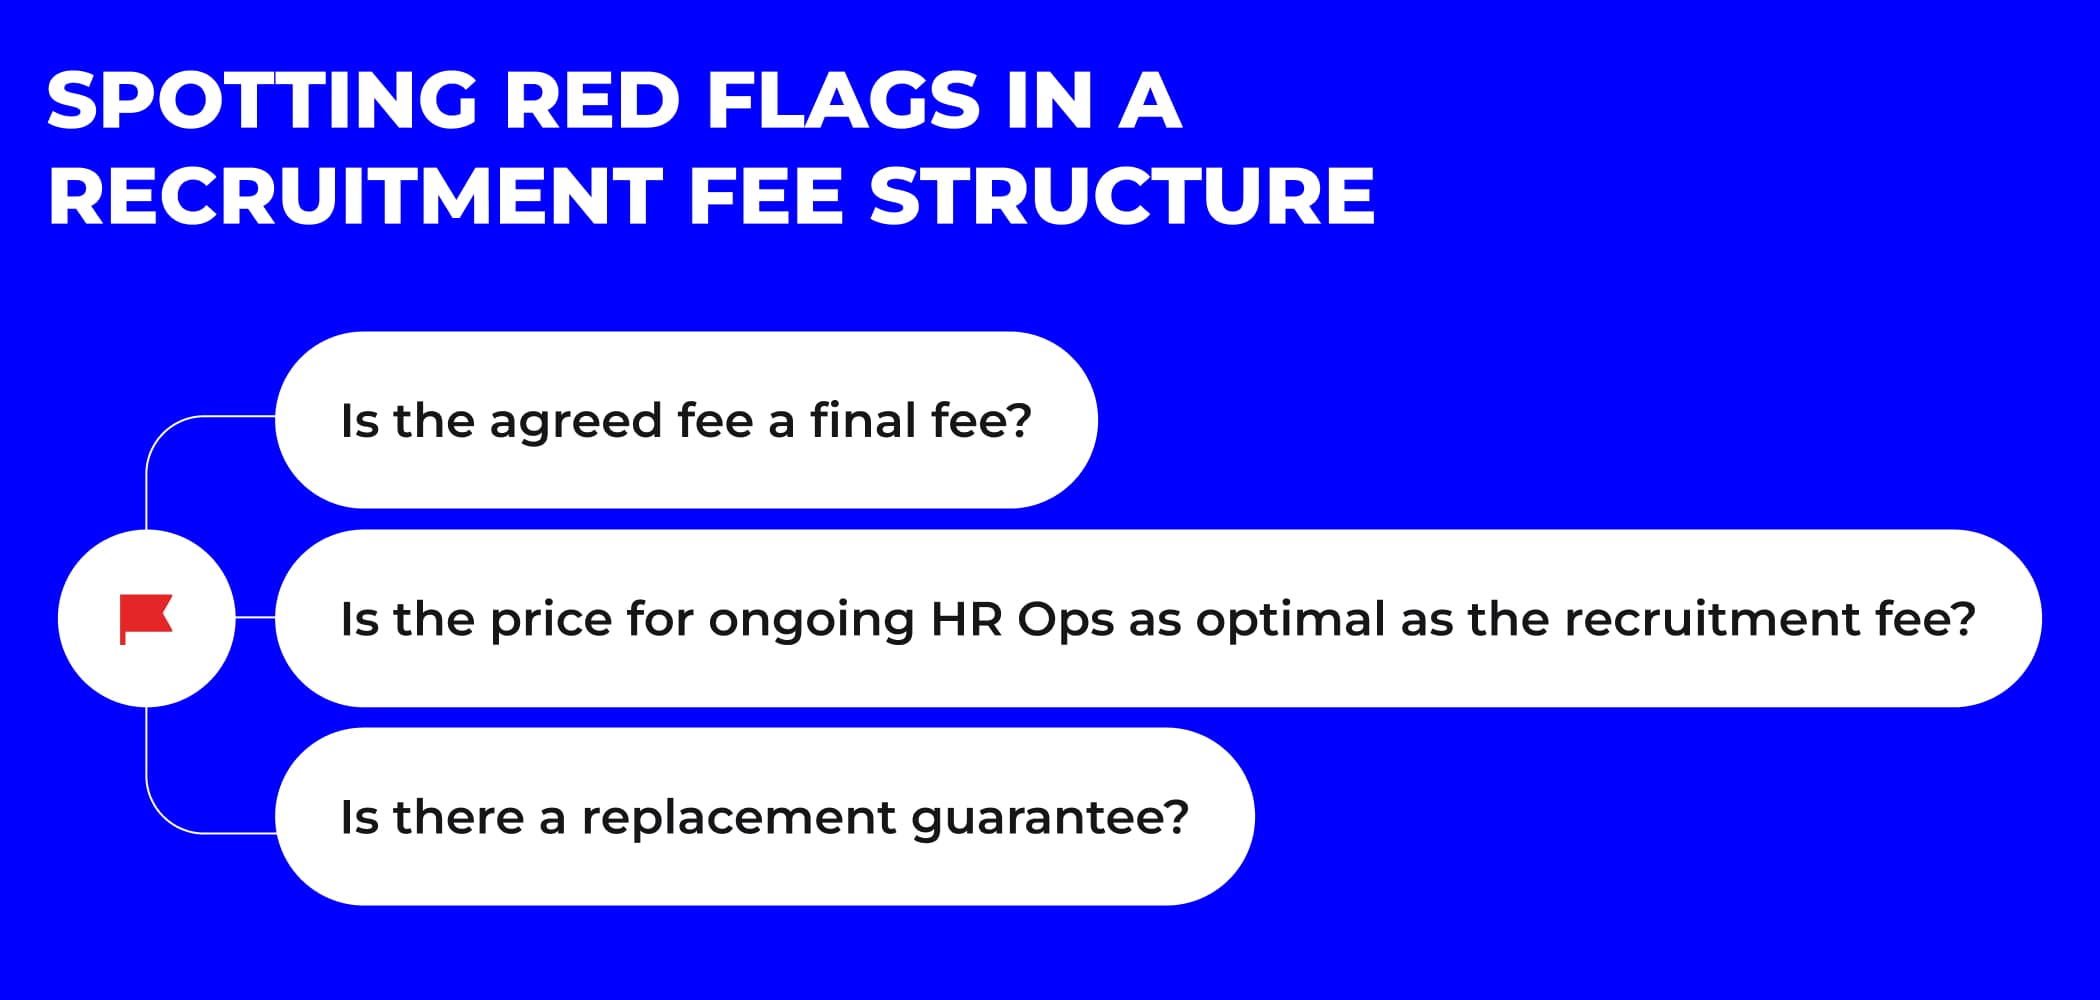 How to spot the fair recruitment fee structure